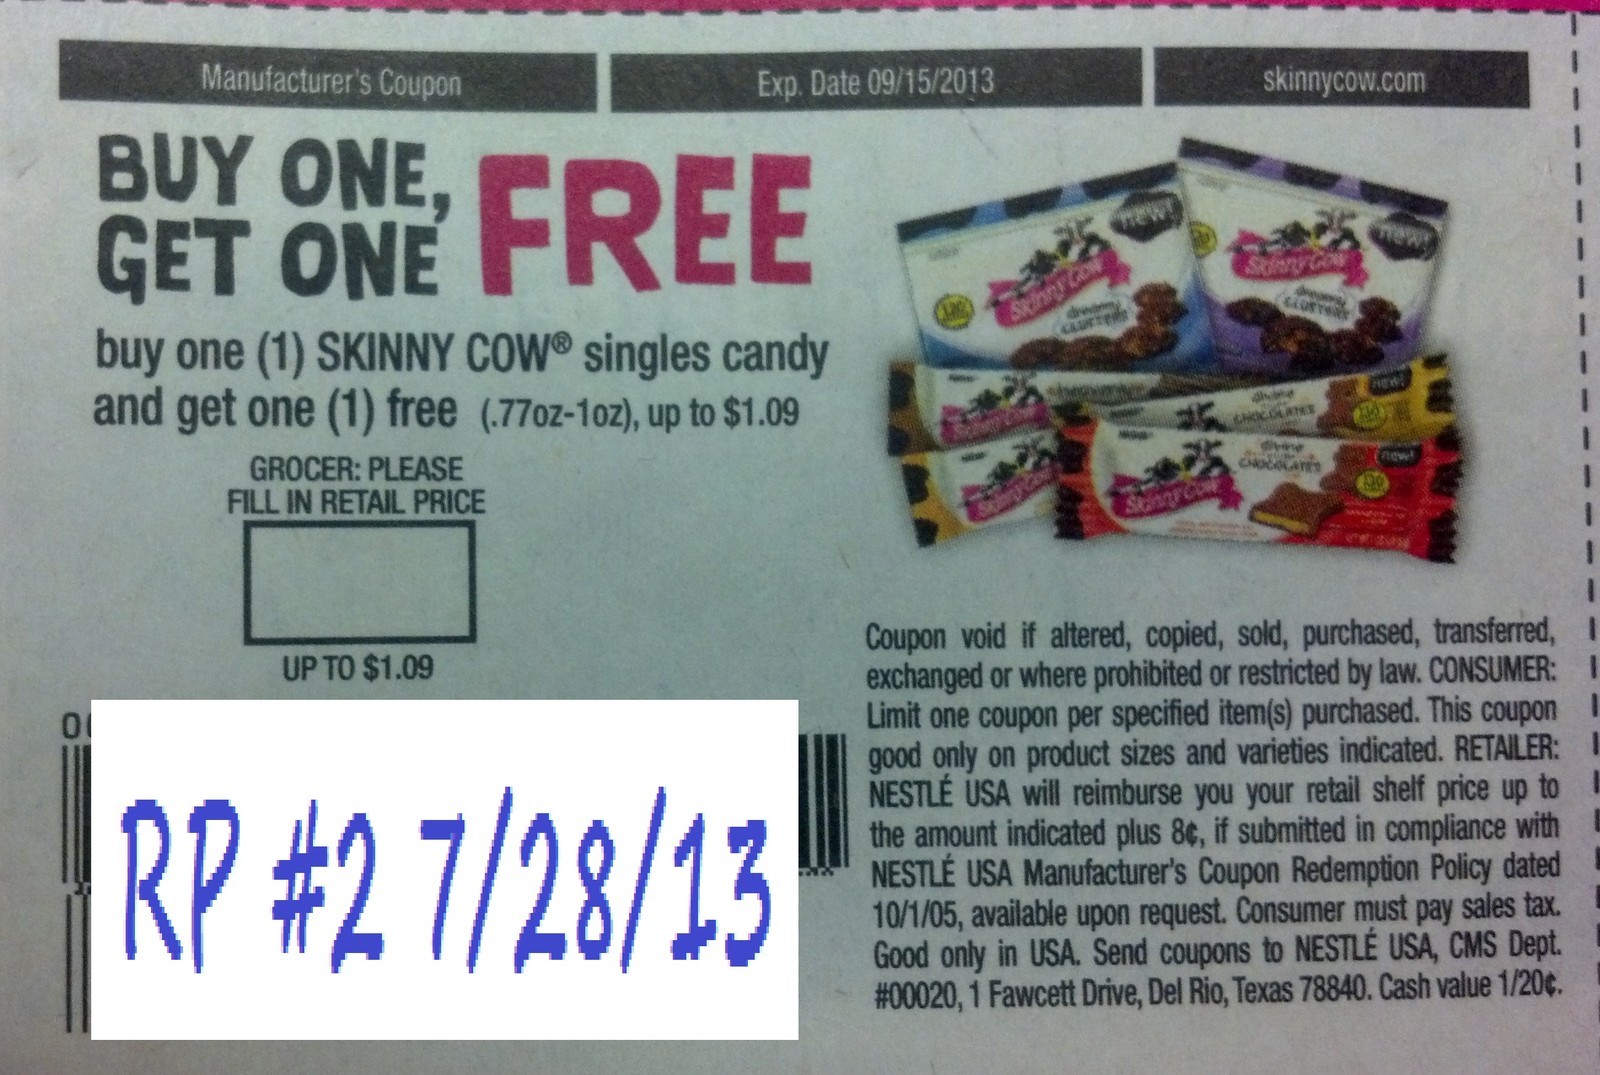 Buy one (1) Skinny Cow singles candy and get one (1) free (.77oz-1oz) up to $1.09 Expires 09/15/2013